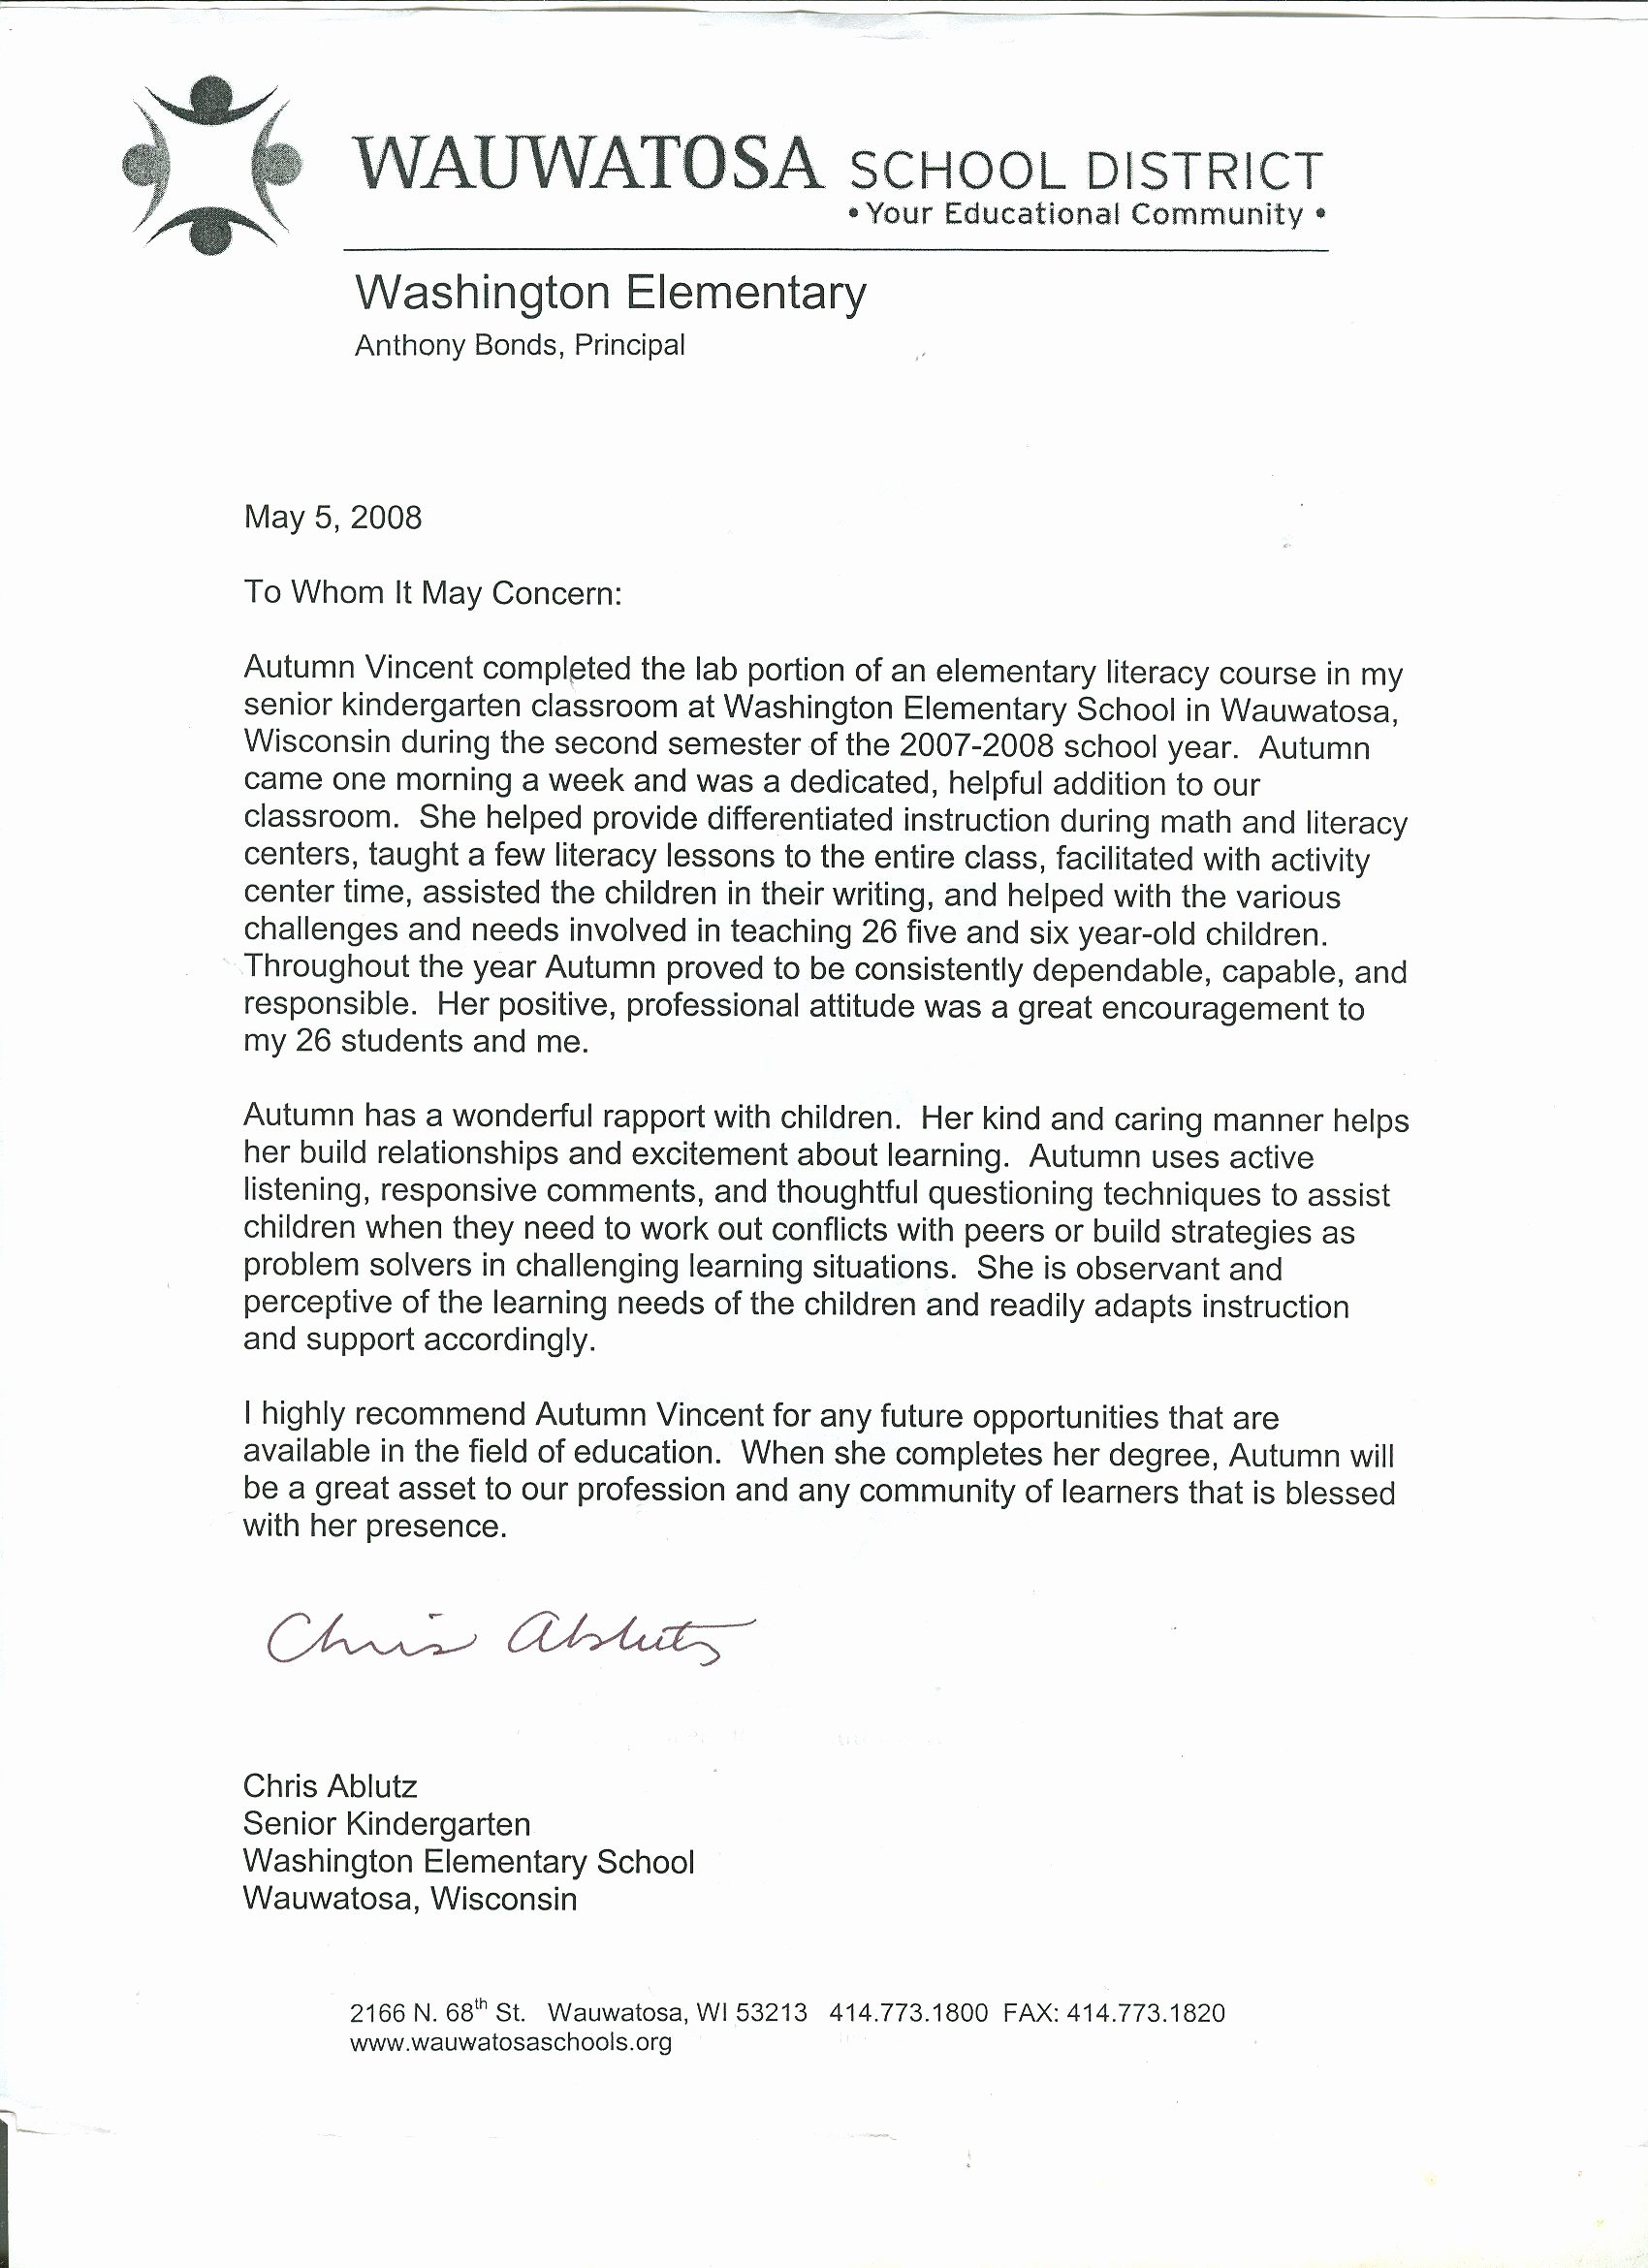 Letters Of Recommendation for Teachers New Teacher Re Mendation Letterletter Re Mendation